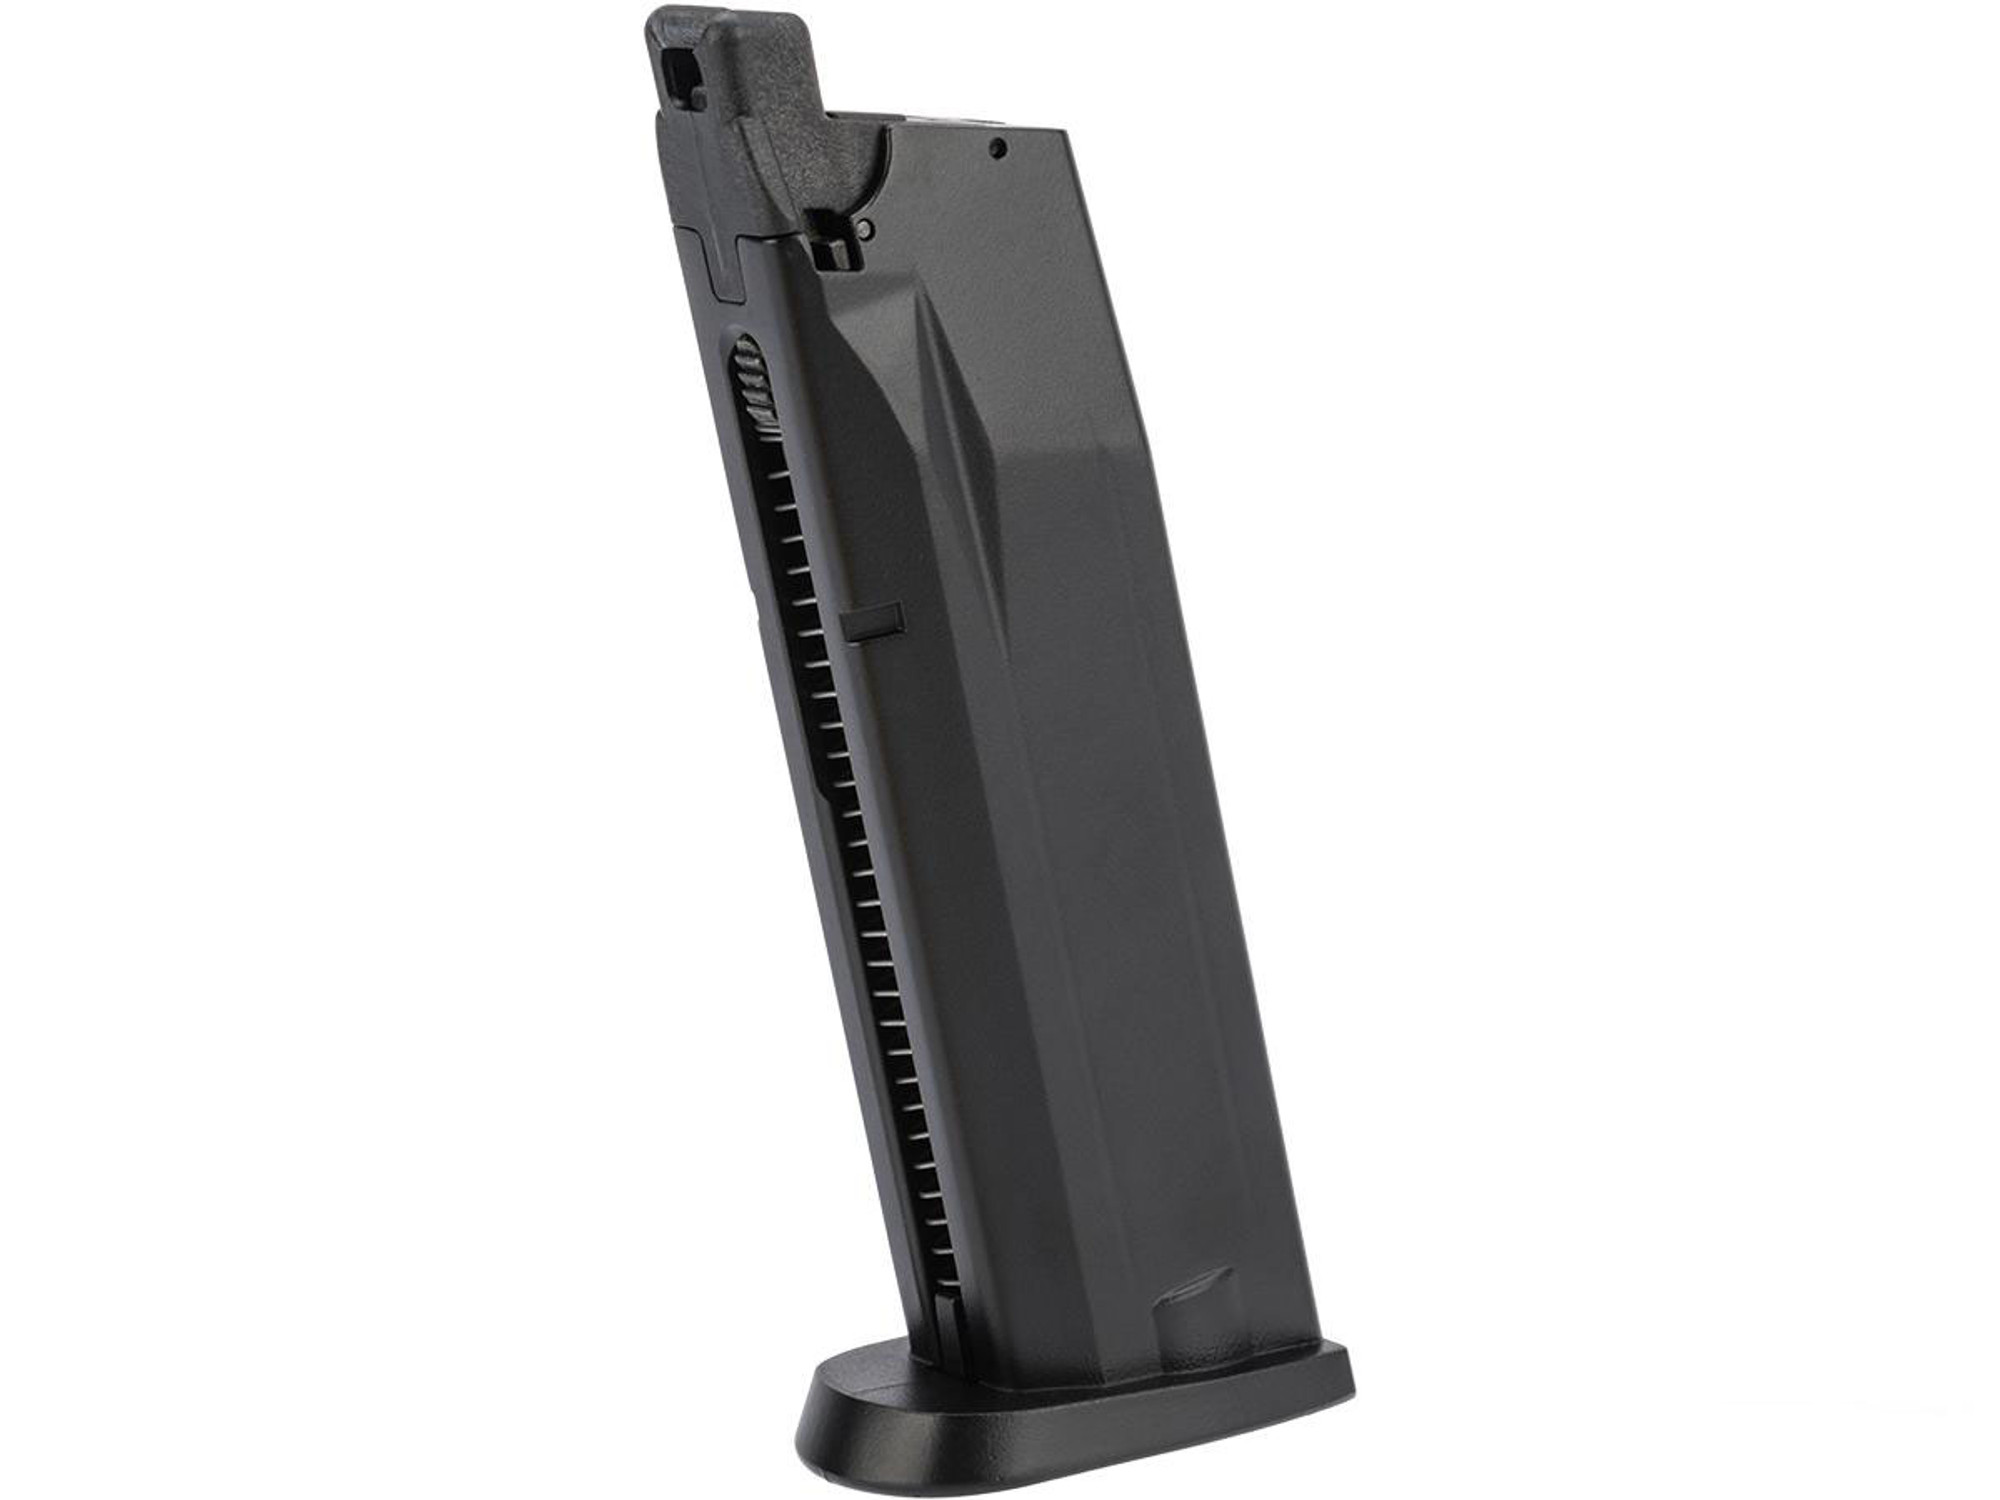 Umarex 15rd Magazine for Smith & Wesson M&P40 Airsoft GBB Pistols - CO2